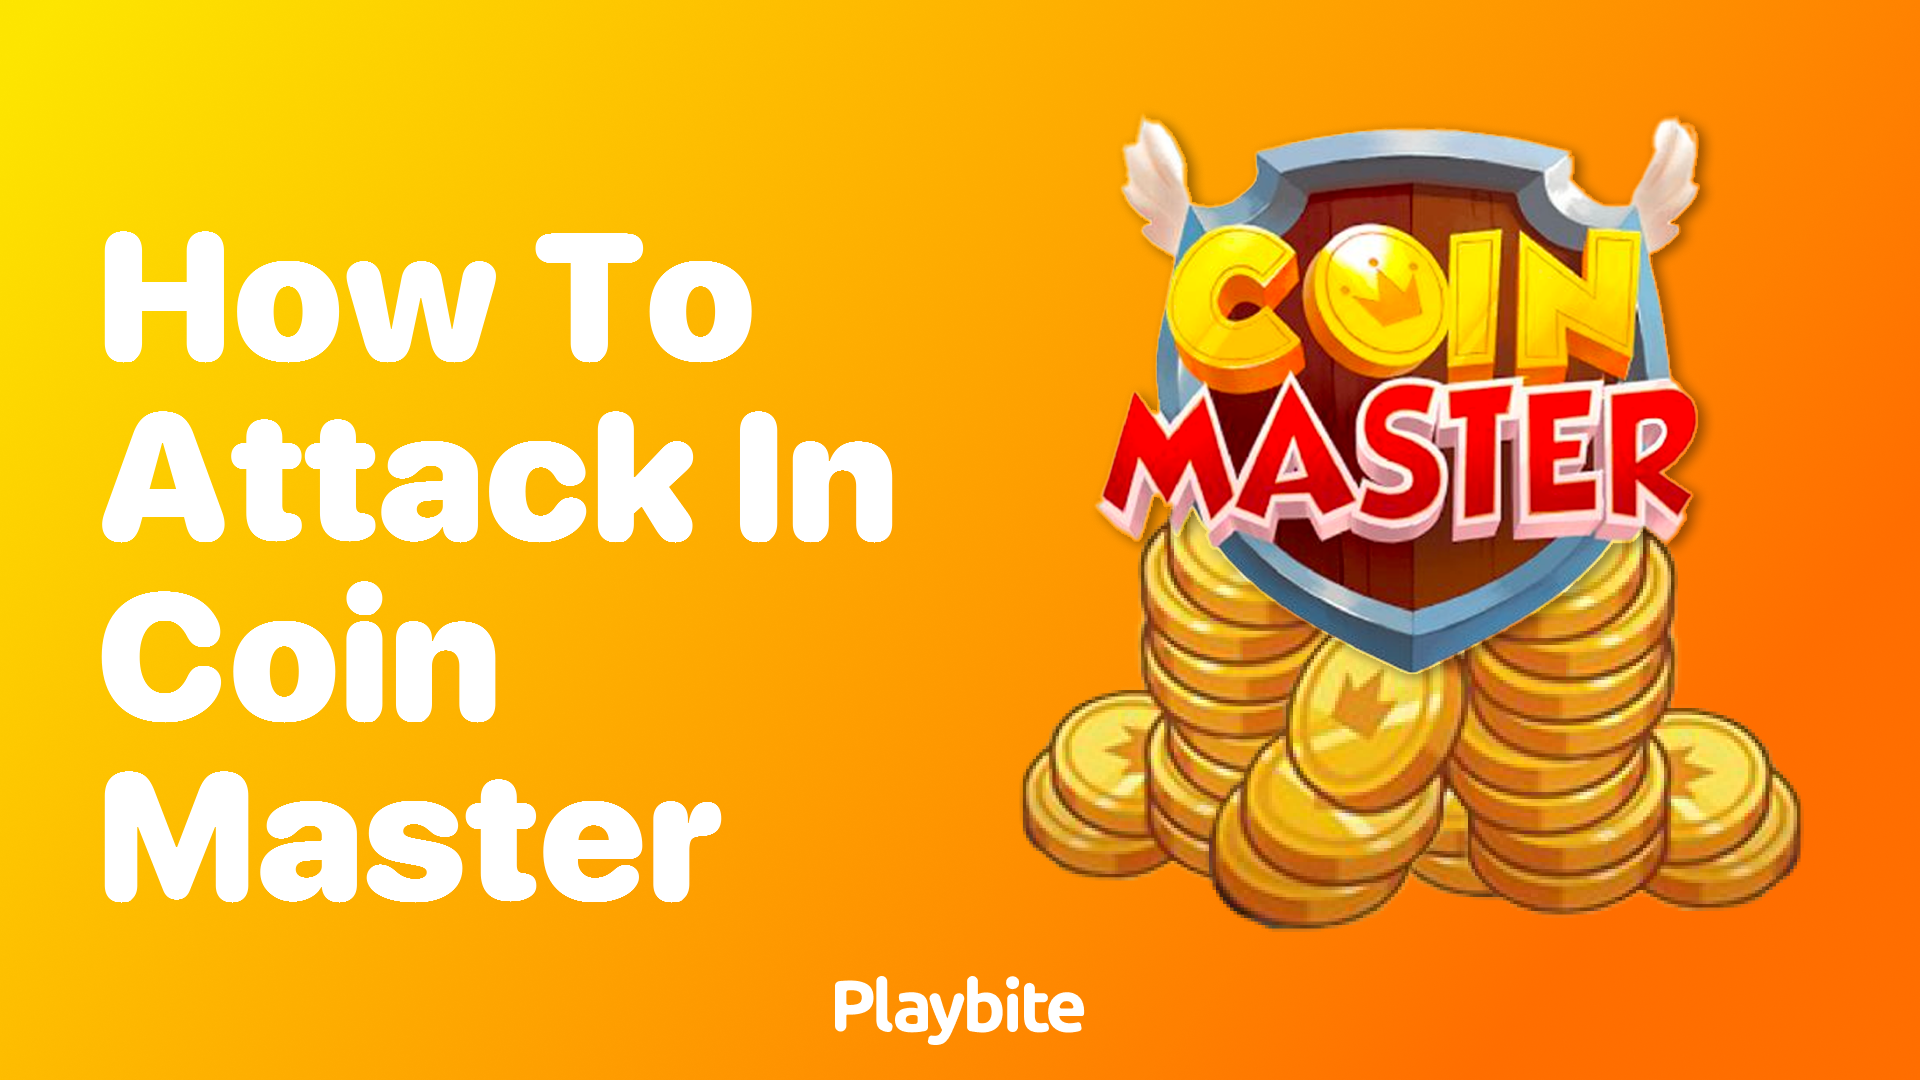 GitHub - Coin-Master-Free-Spins/how-to-get-free-coin-master-spins